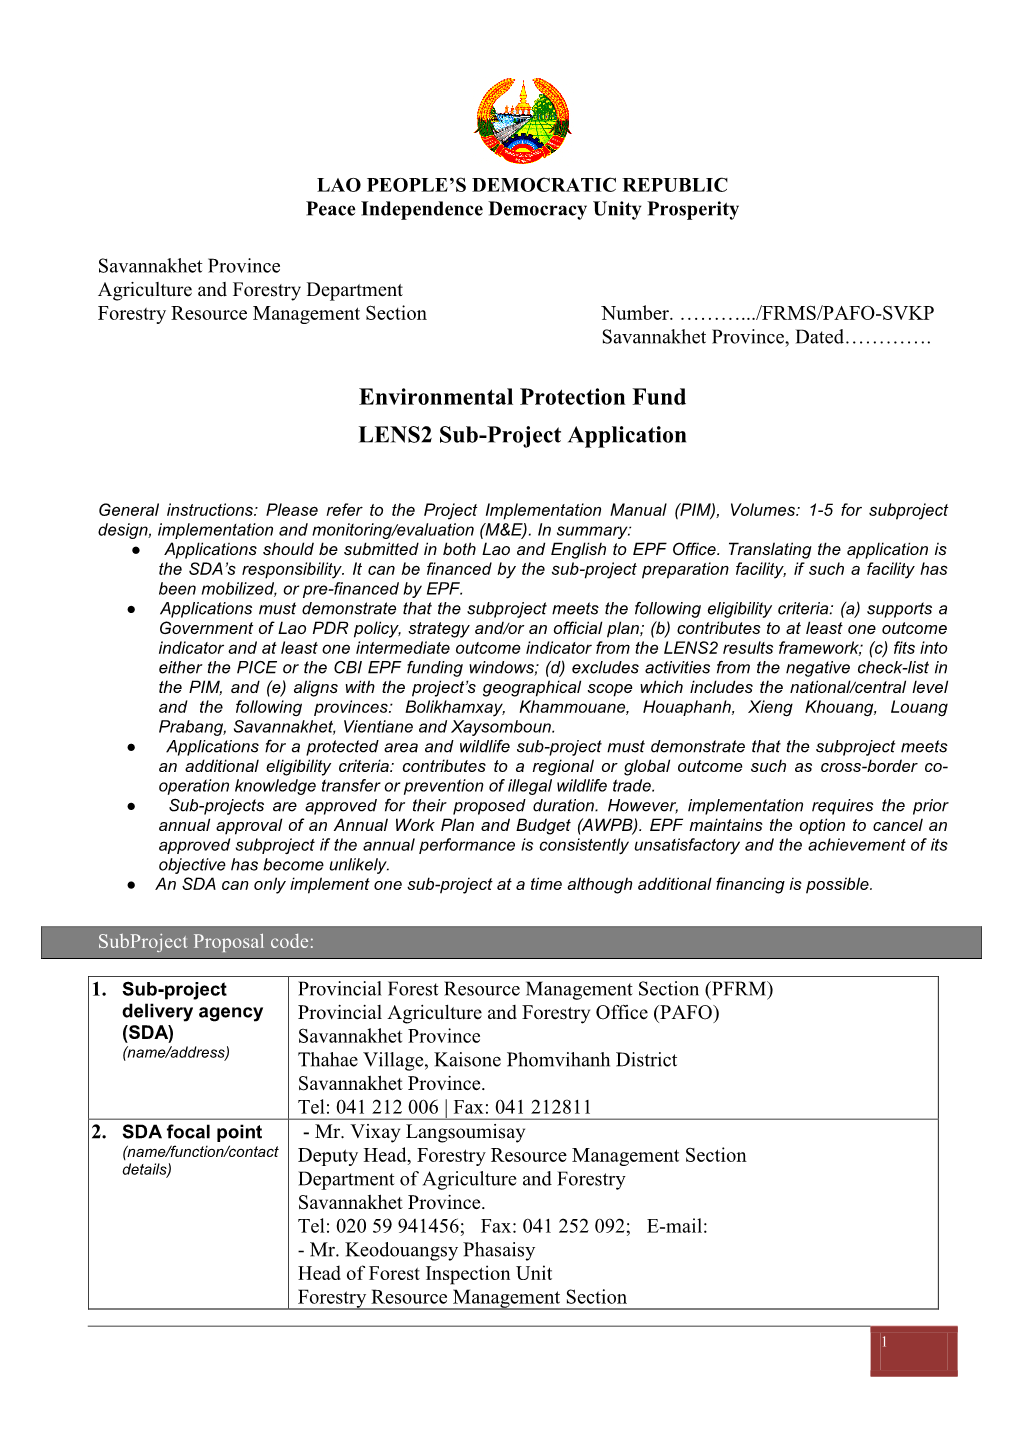 Environmental Protection Fund LENS2 Sub-Project Application